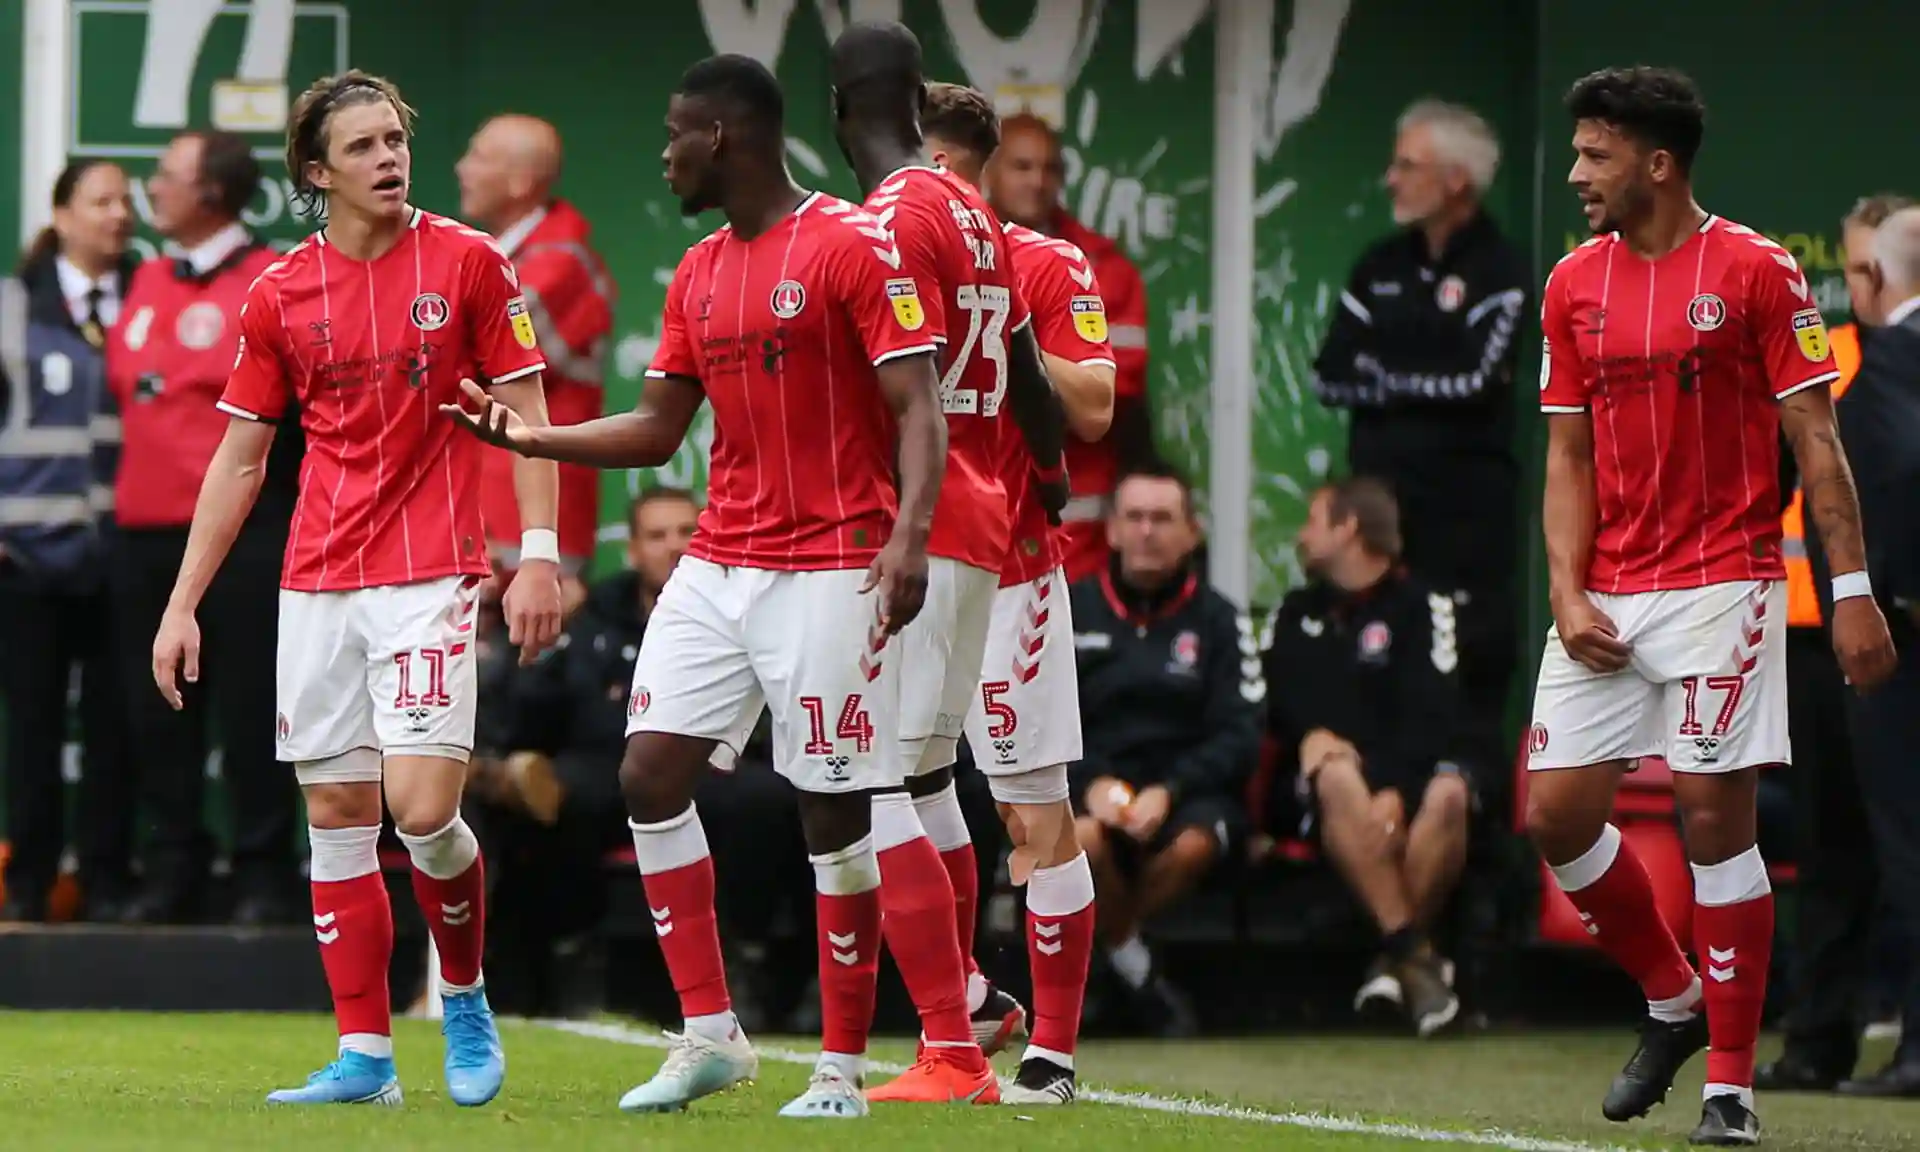 Bonne's Charlton Athletic Beat QPR To Move Out Of Bottom Three